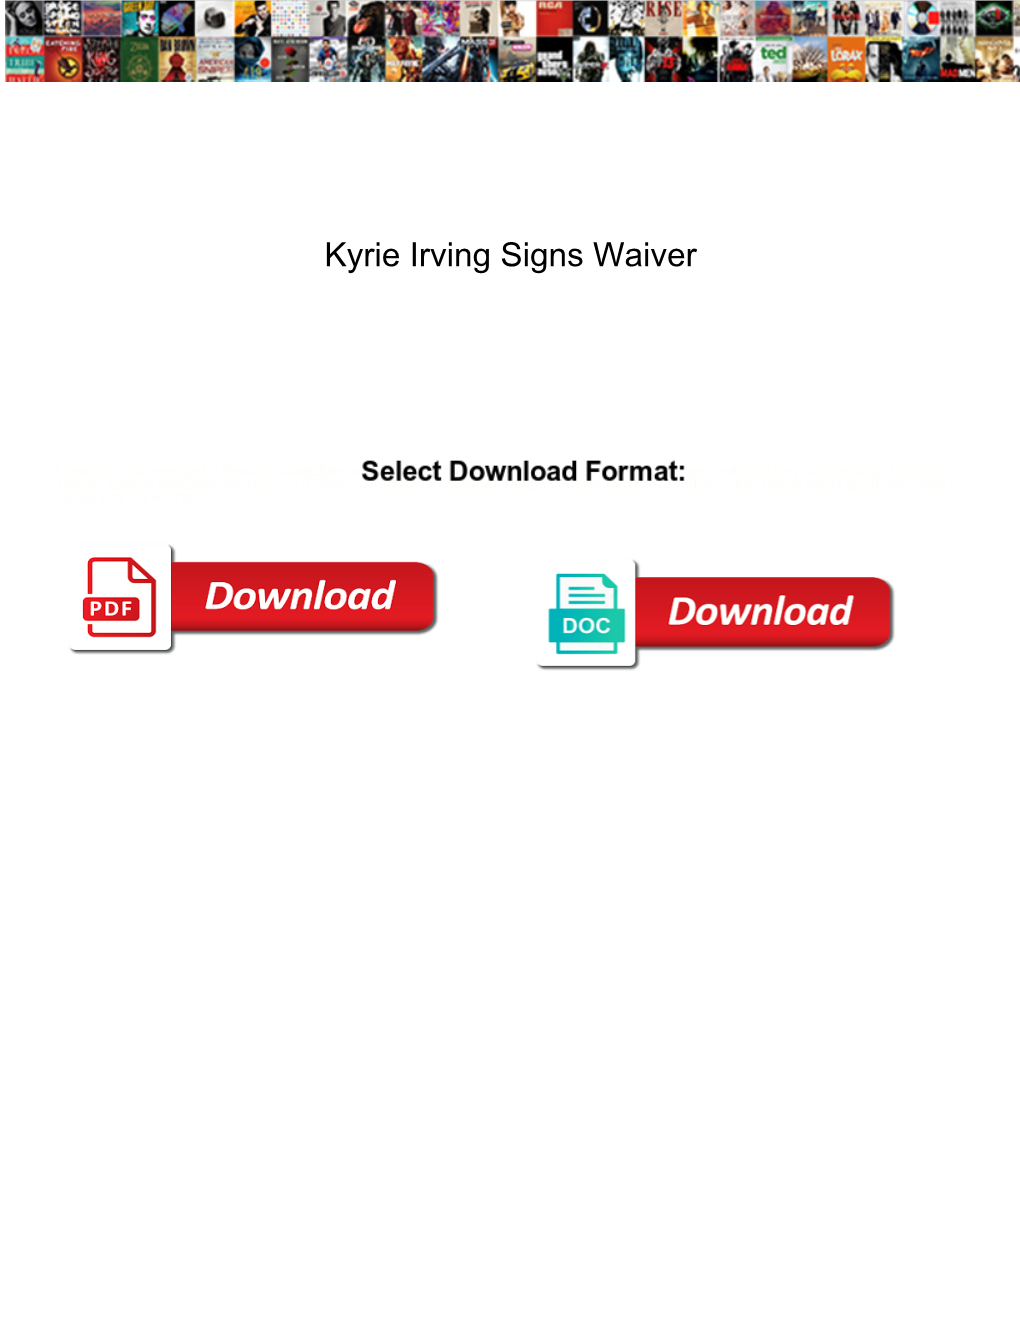 Kyrie Irving Signs Waiver